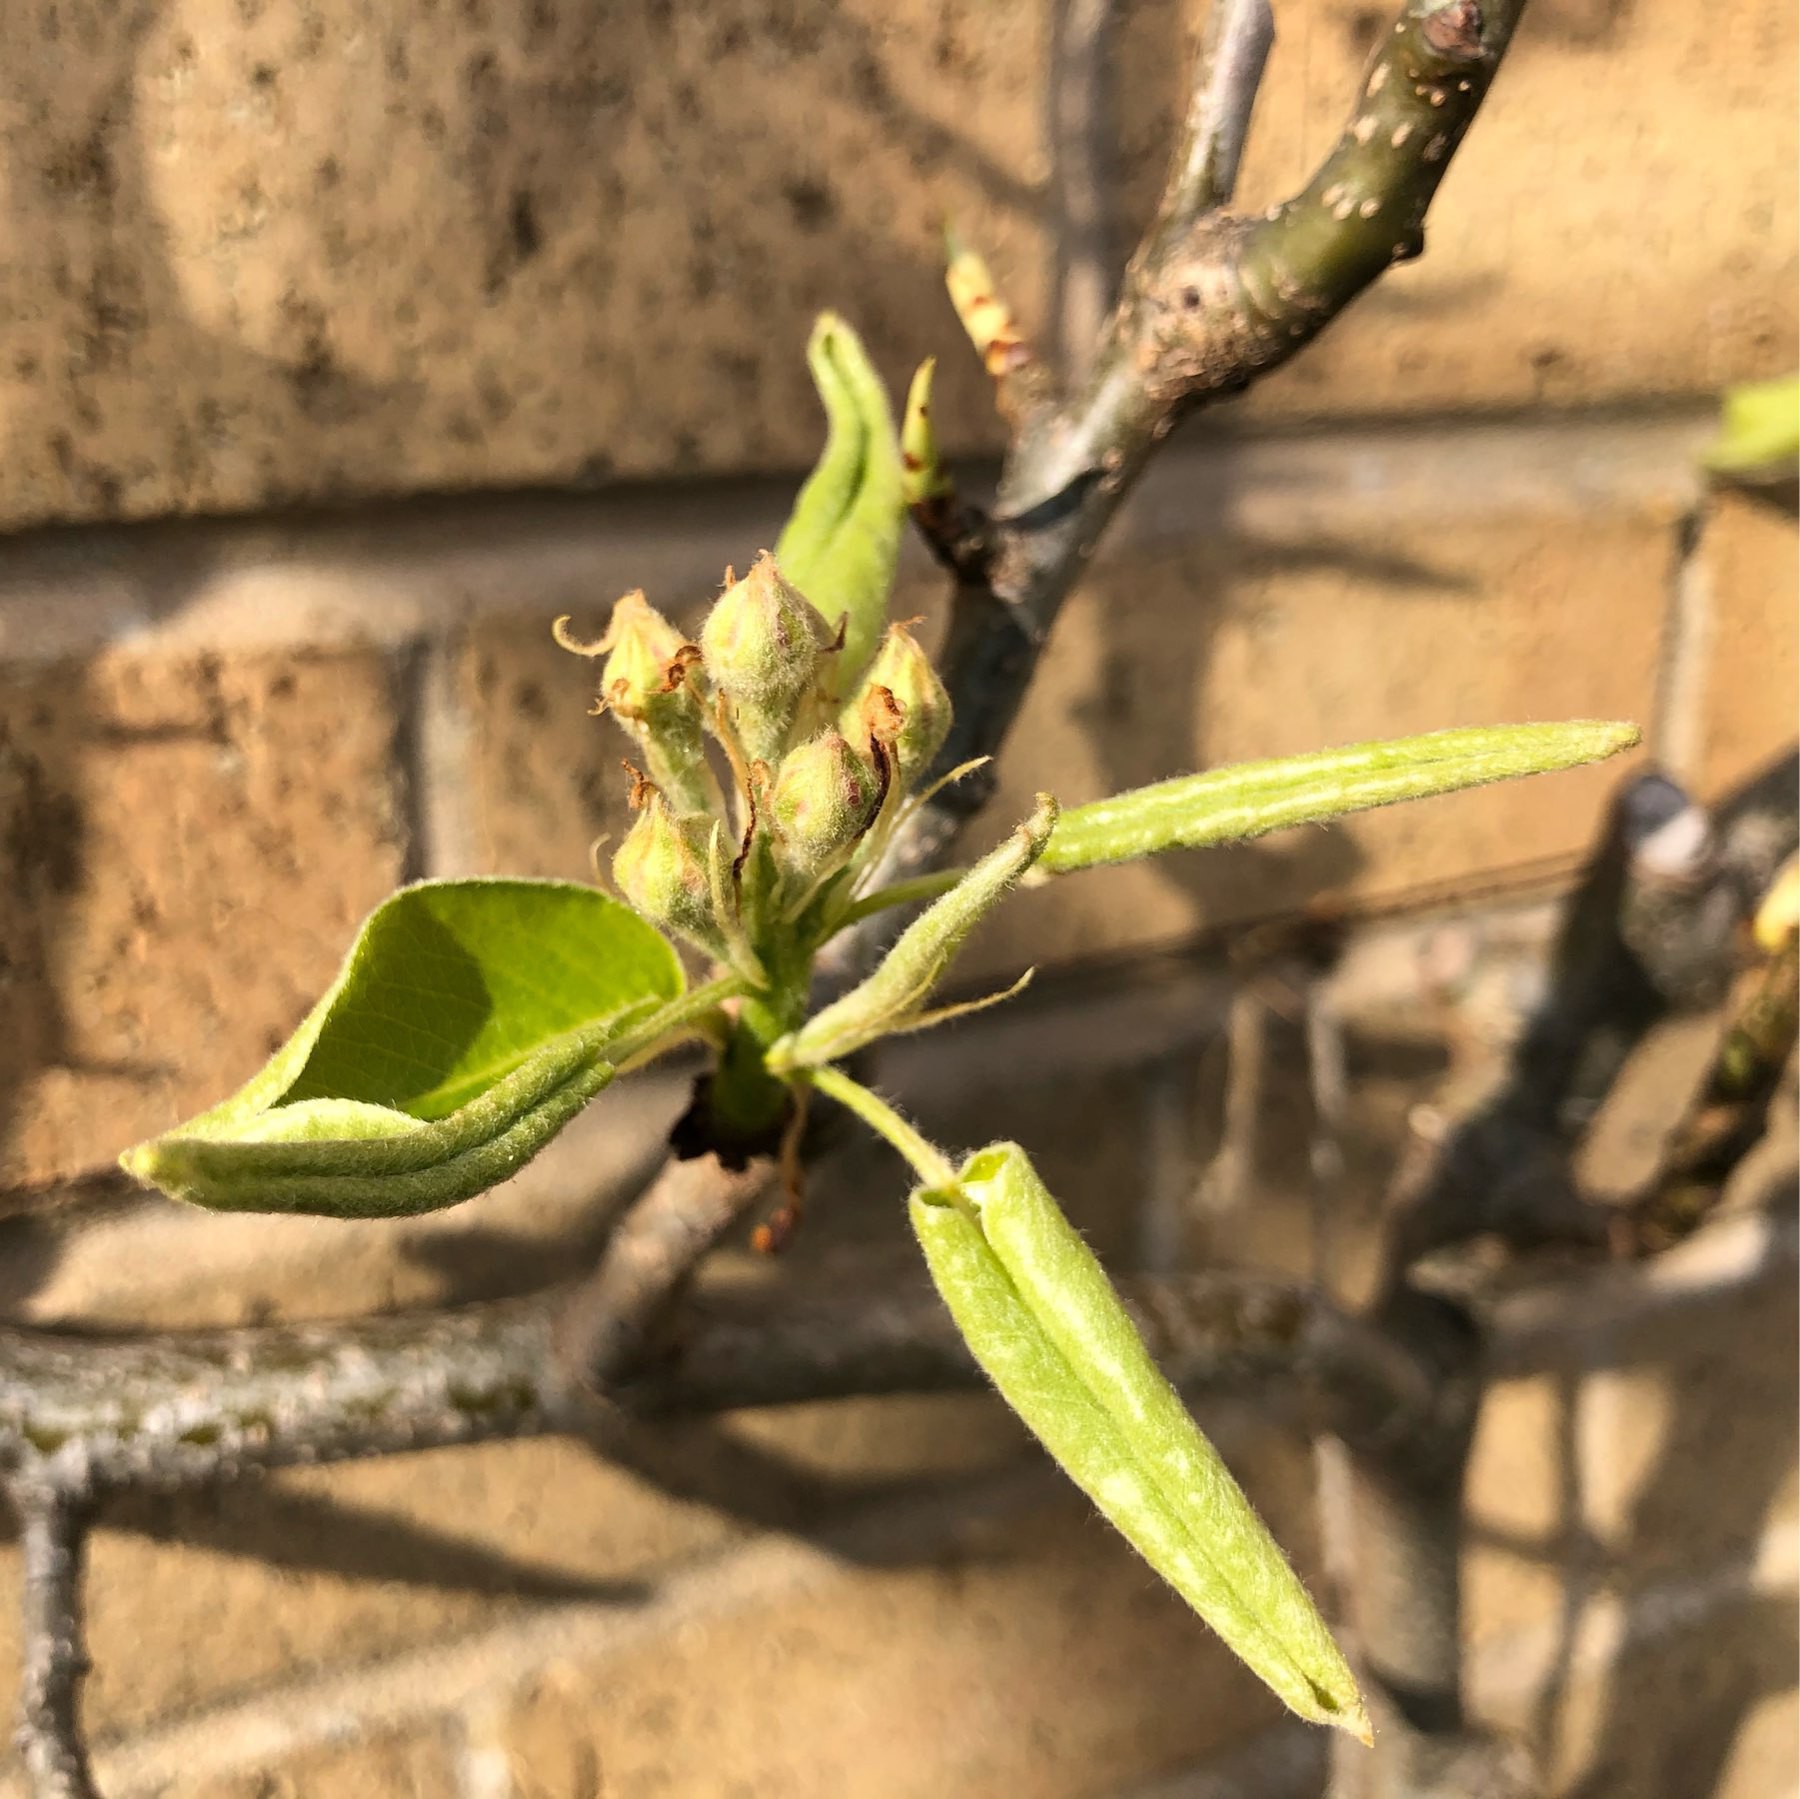 An espalier fruit tree coming into bloom.